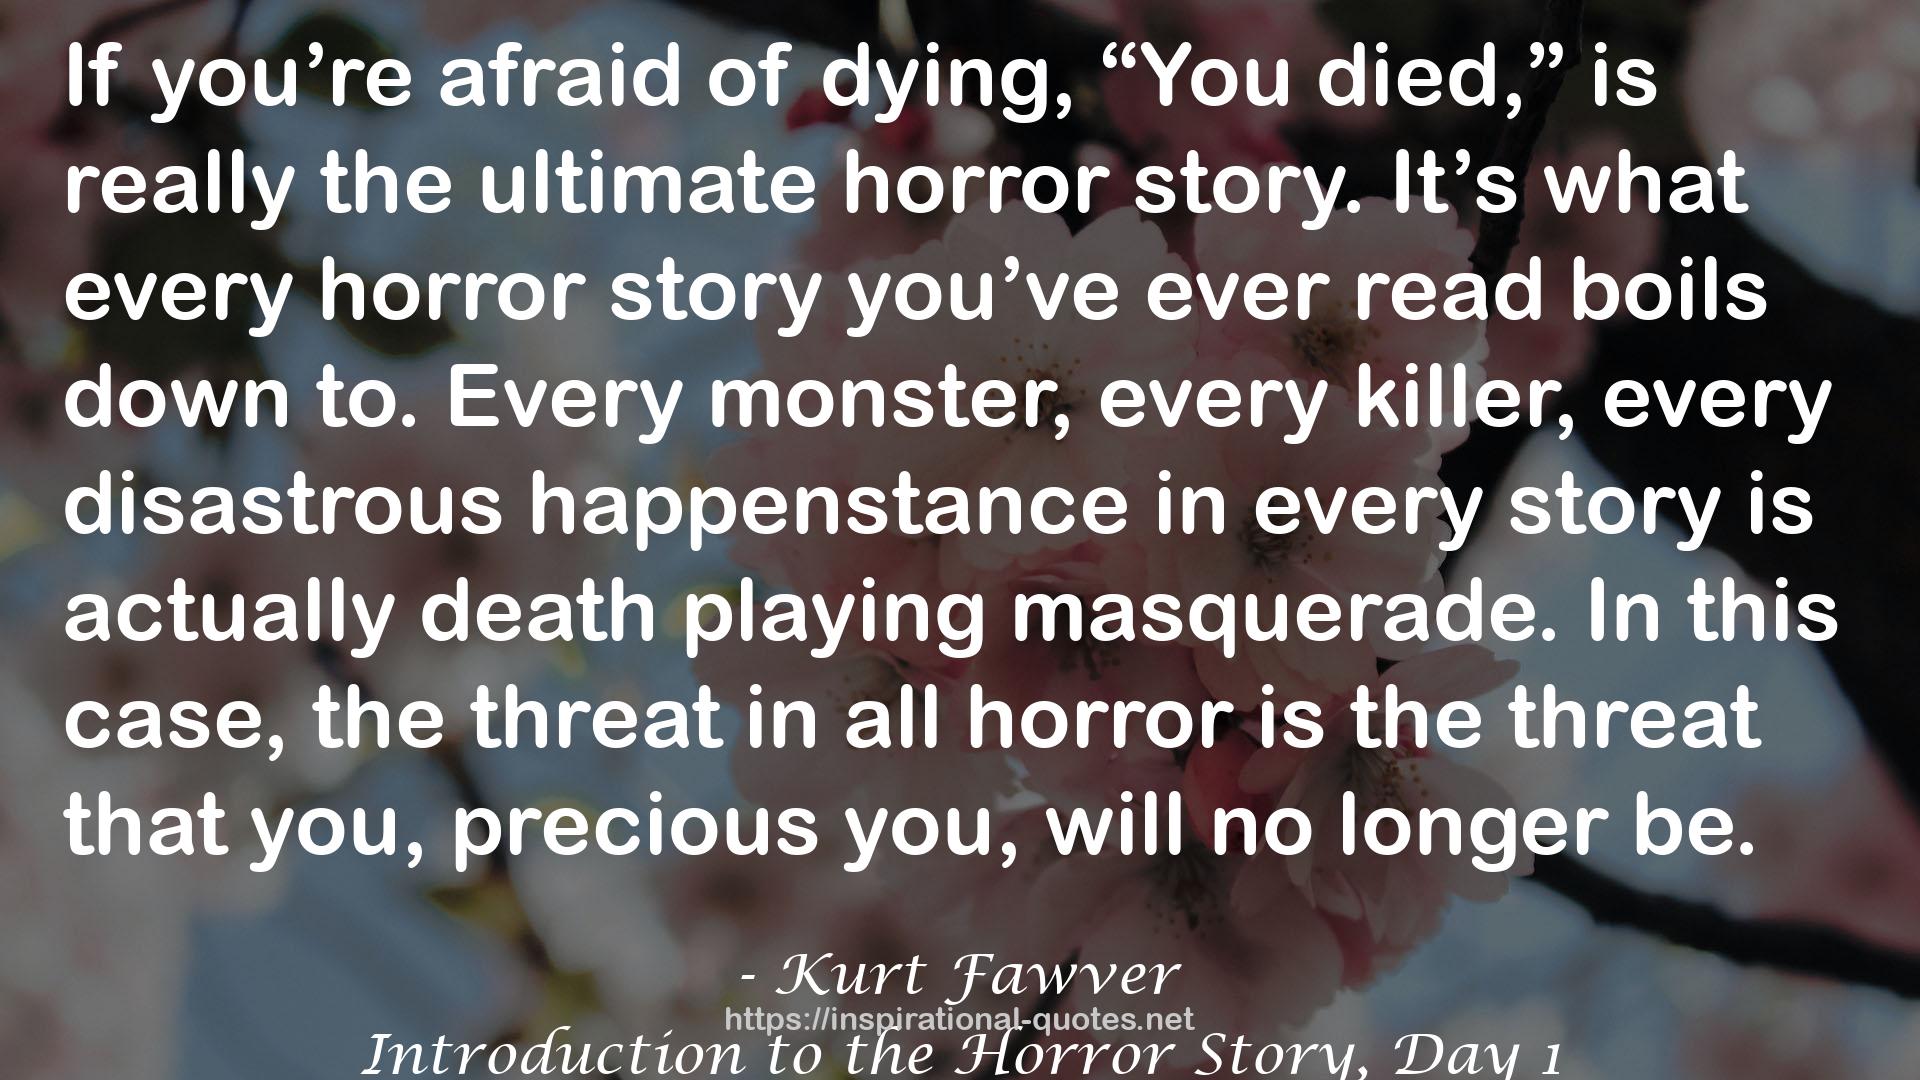 Introduction to the Horror Story, Day 1 QUOTES